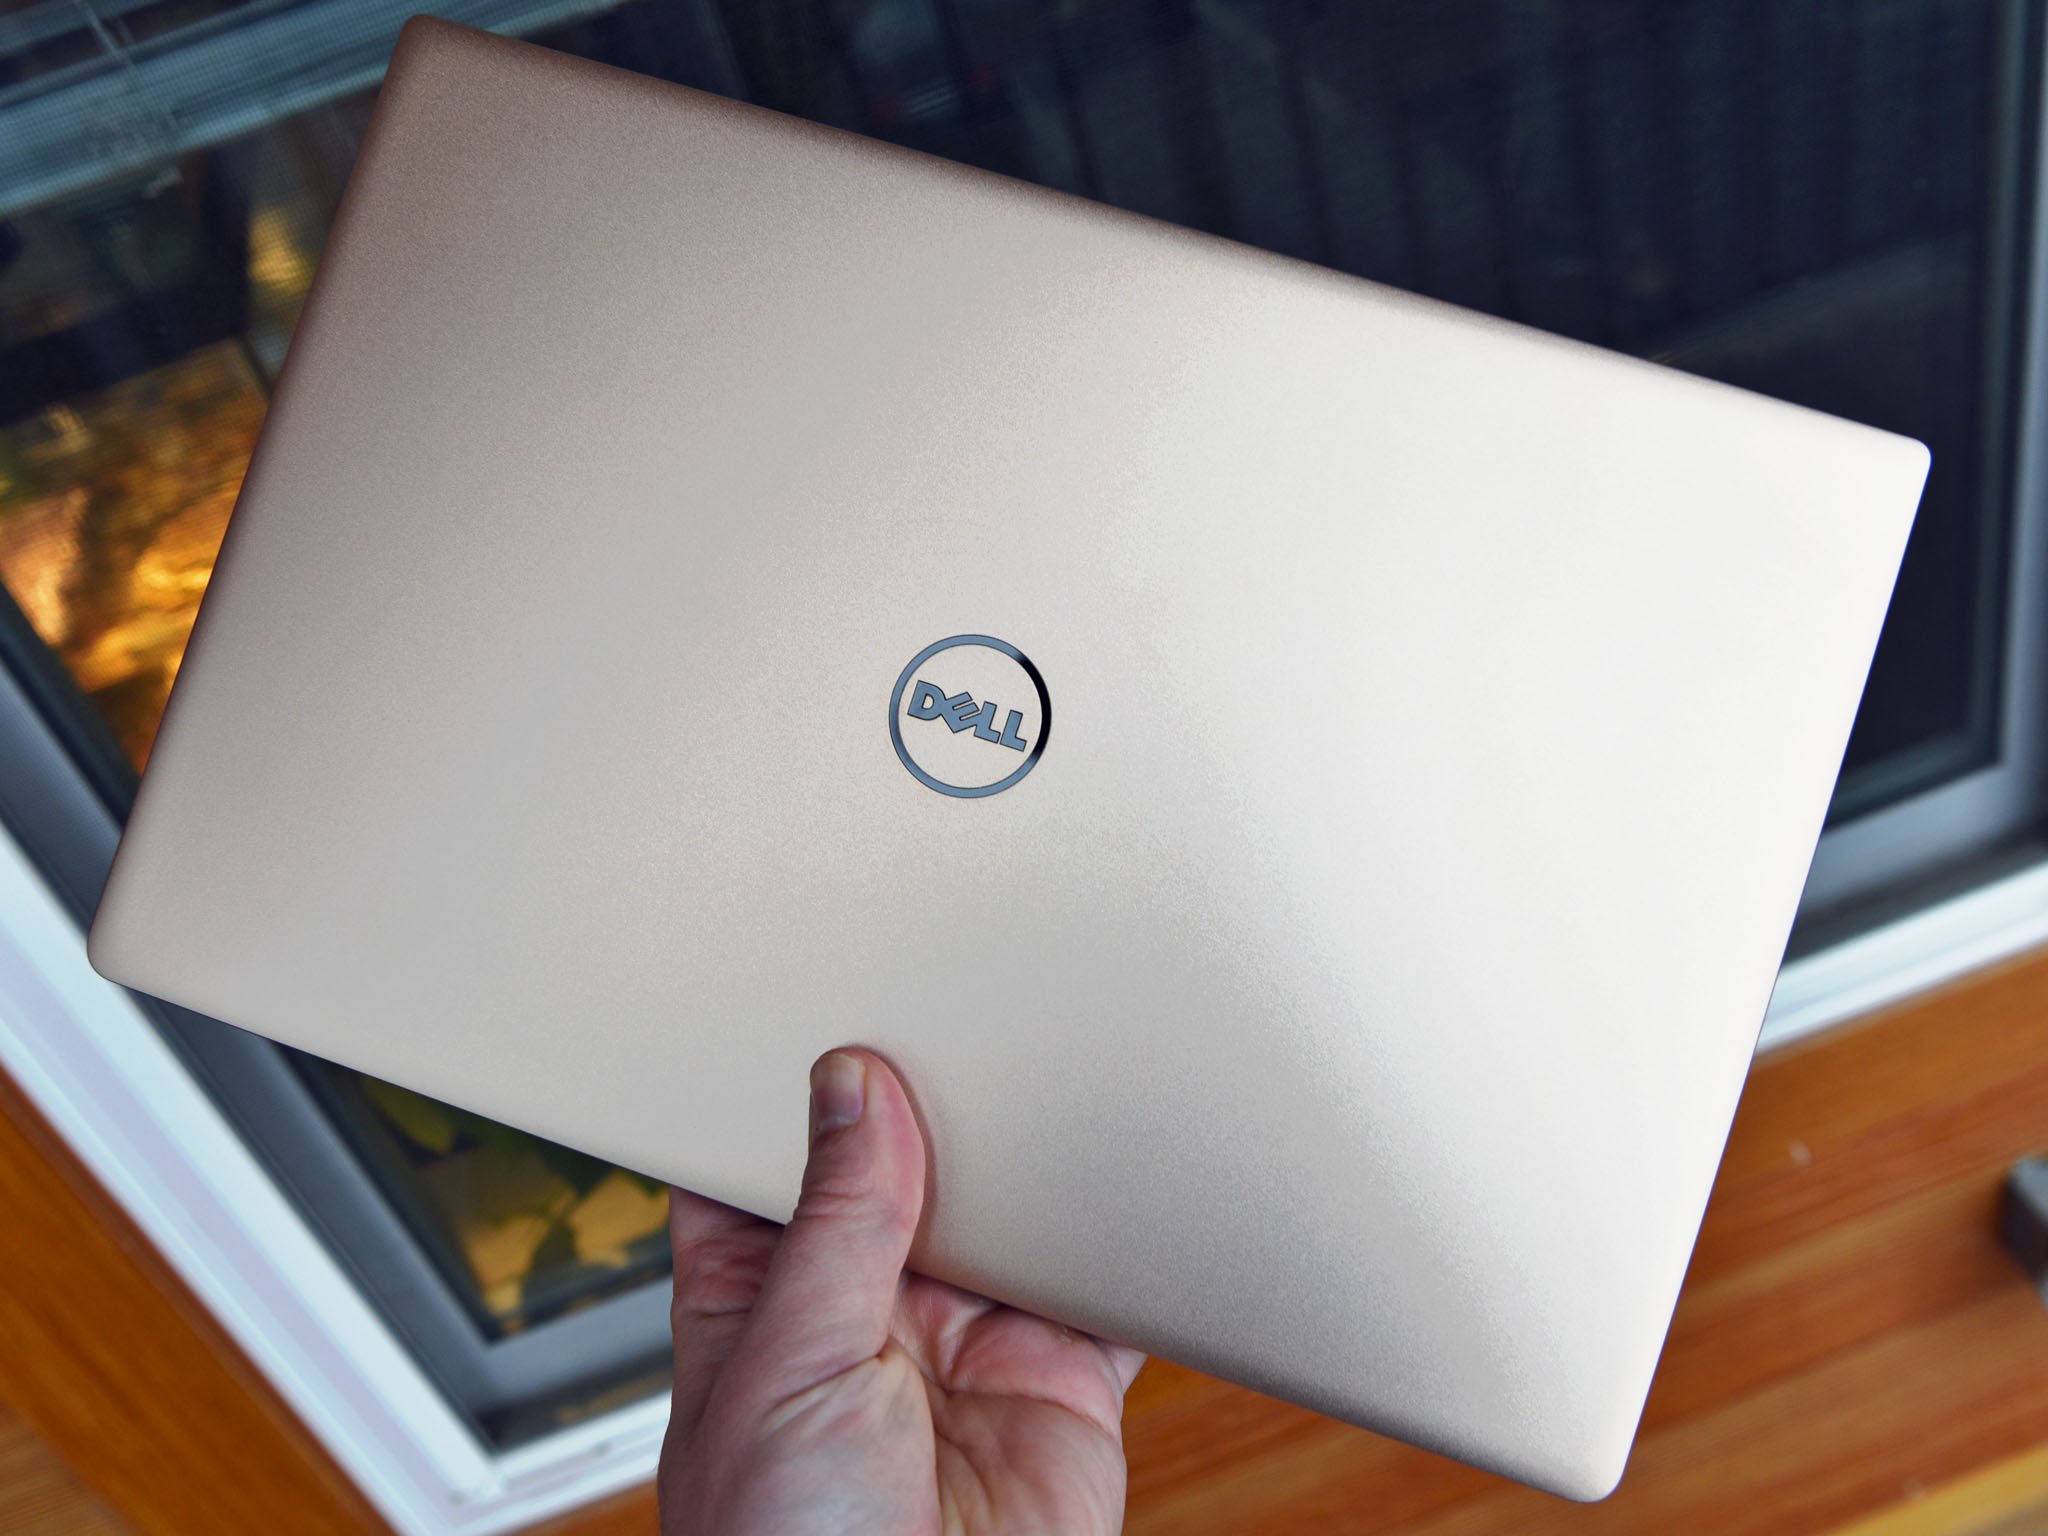 Dell XPS 13 (9360) firmware update brings battery life improvements and more